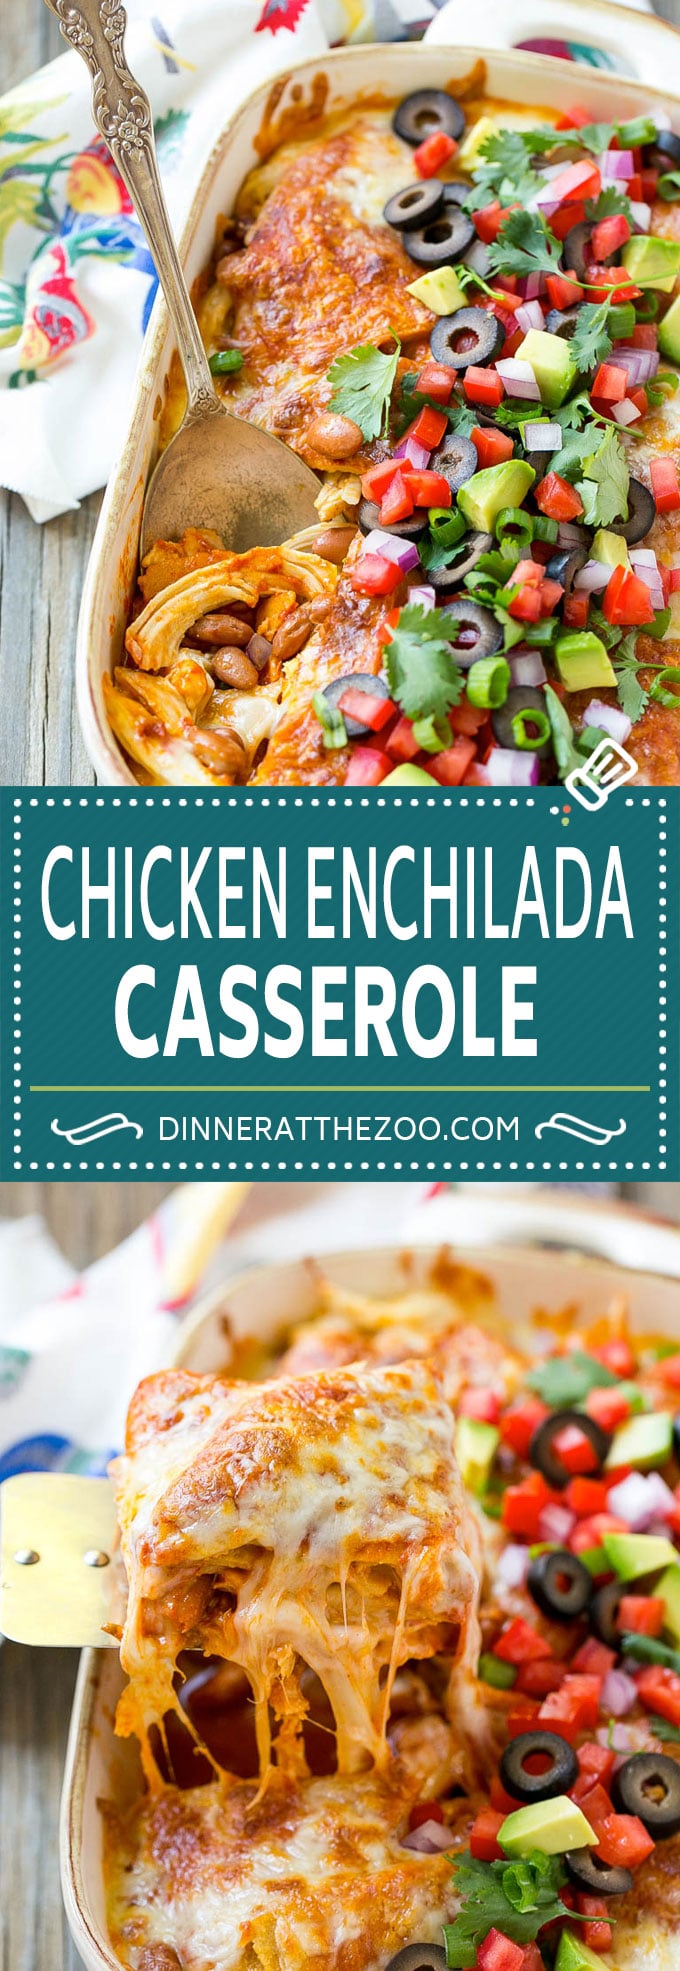 Chicken Enchilada Casserole Recipe | Mexican Casserole | Chicken Enchiladas #enchiladas #casserole #chicken #cheese #mexicanfood #dinner #dinneratthezoo